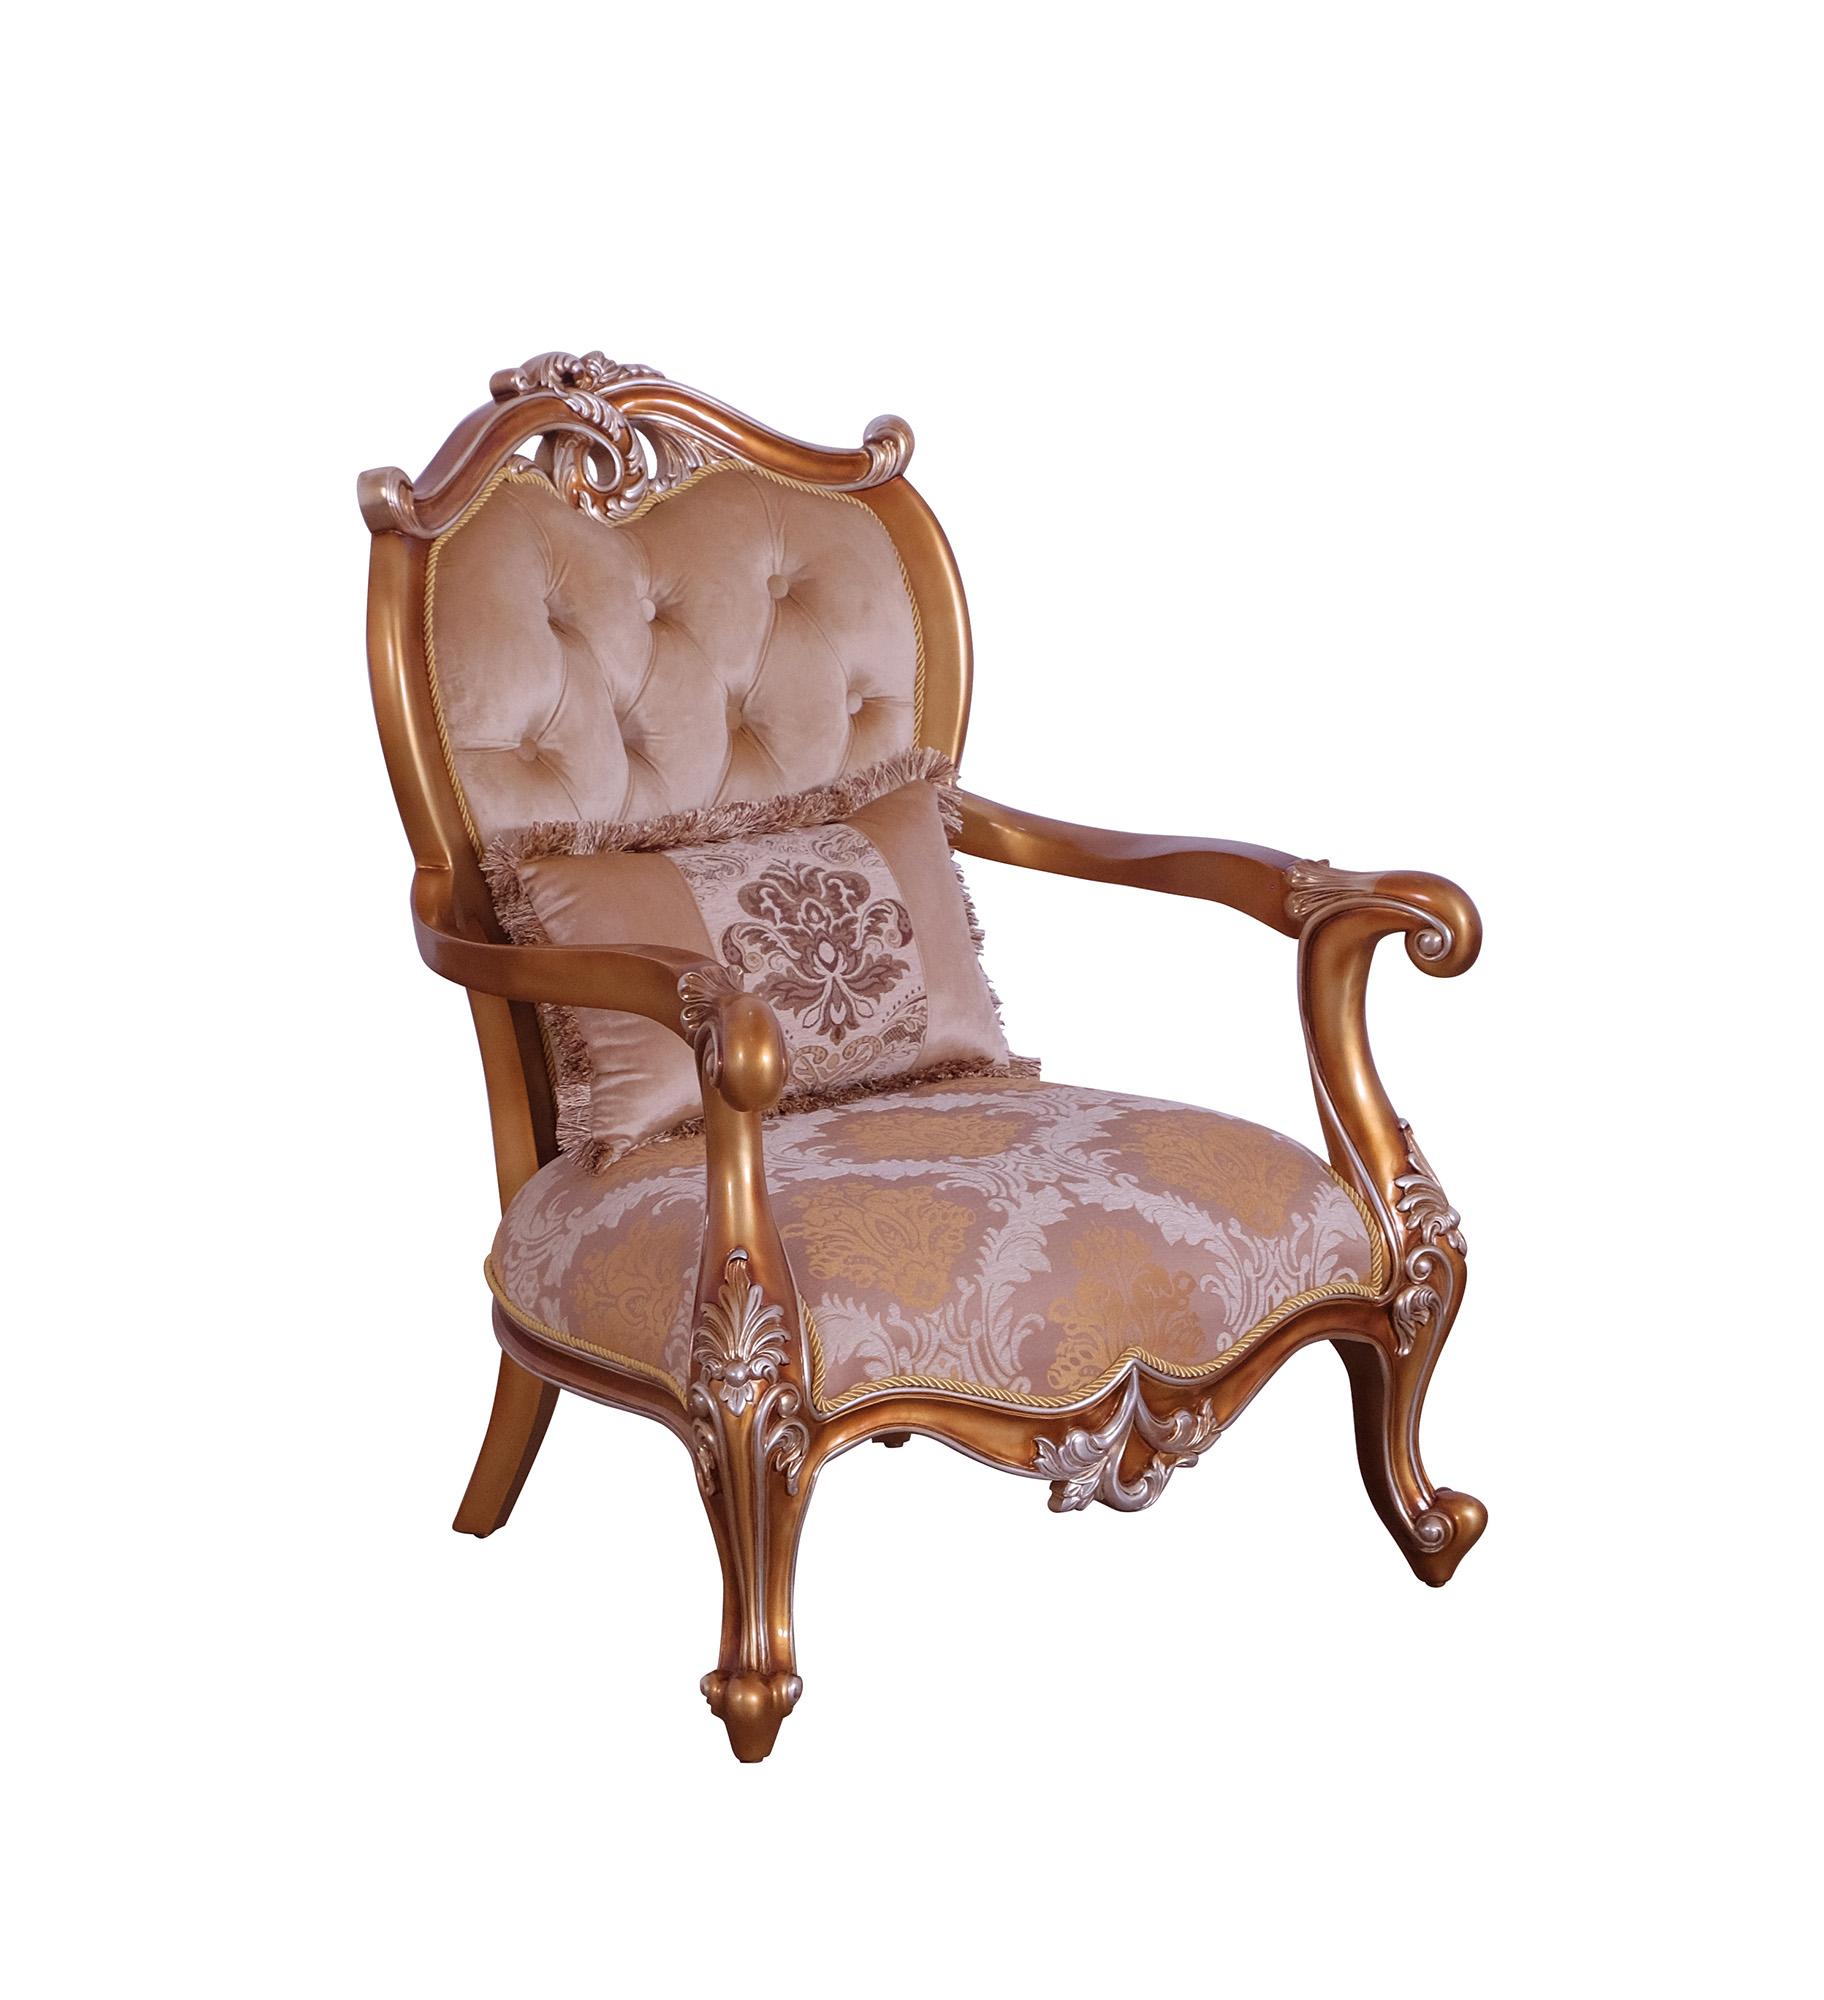 Classic, Traditional Arm Chair AUGUSTUS 37057-C in Sand, Gold Fabric